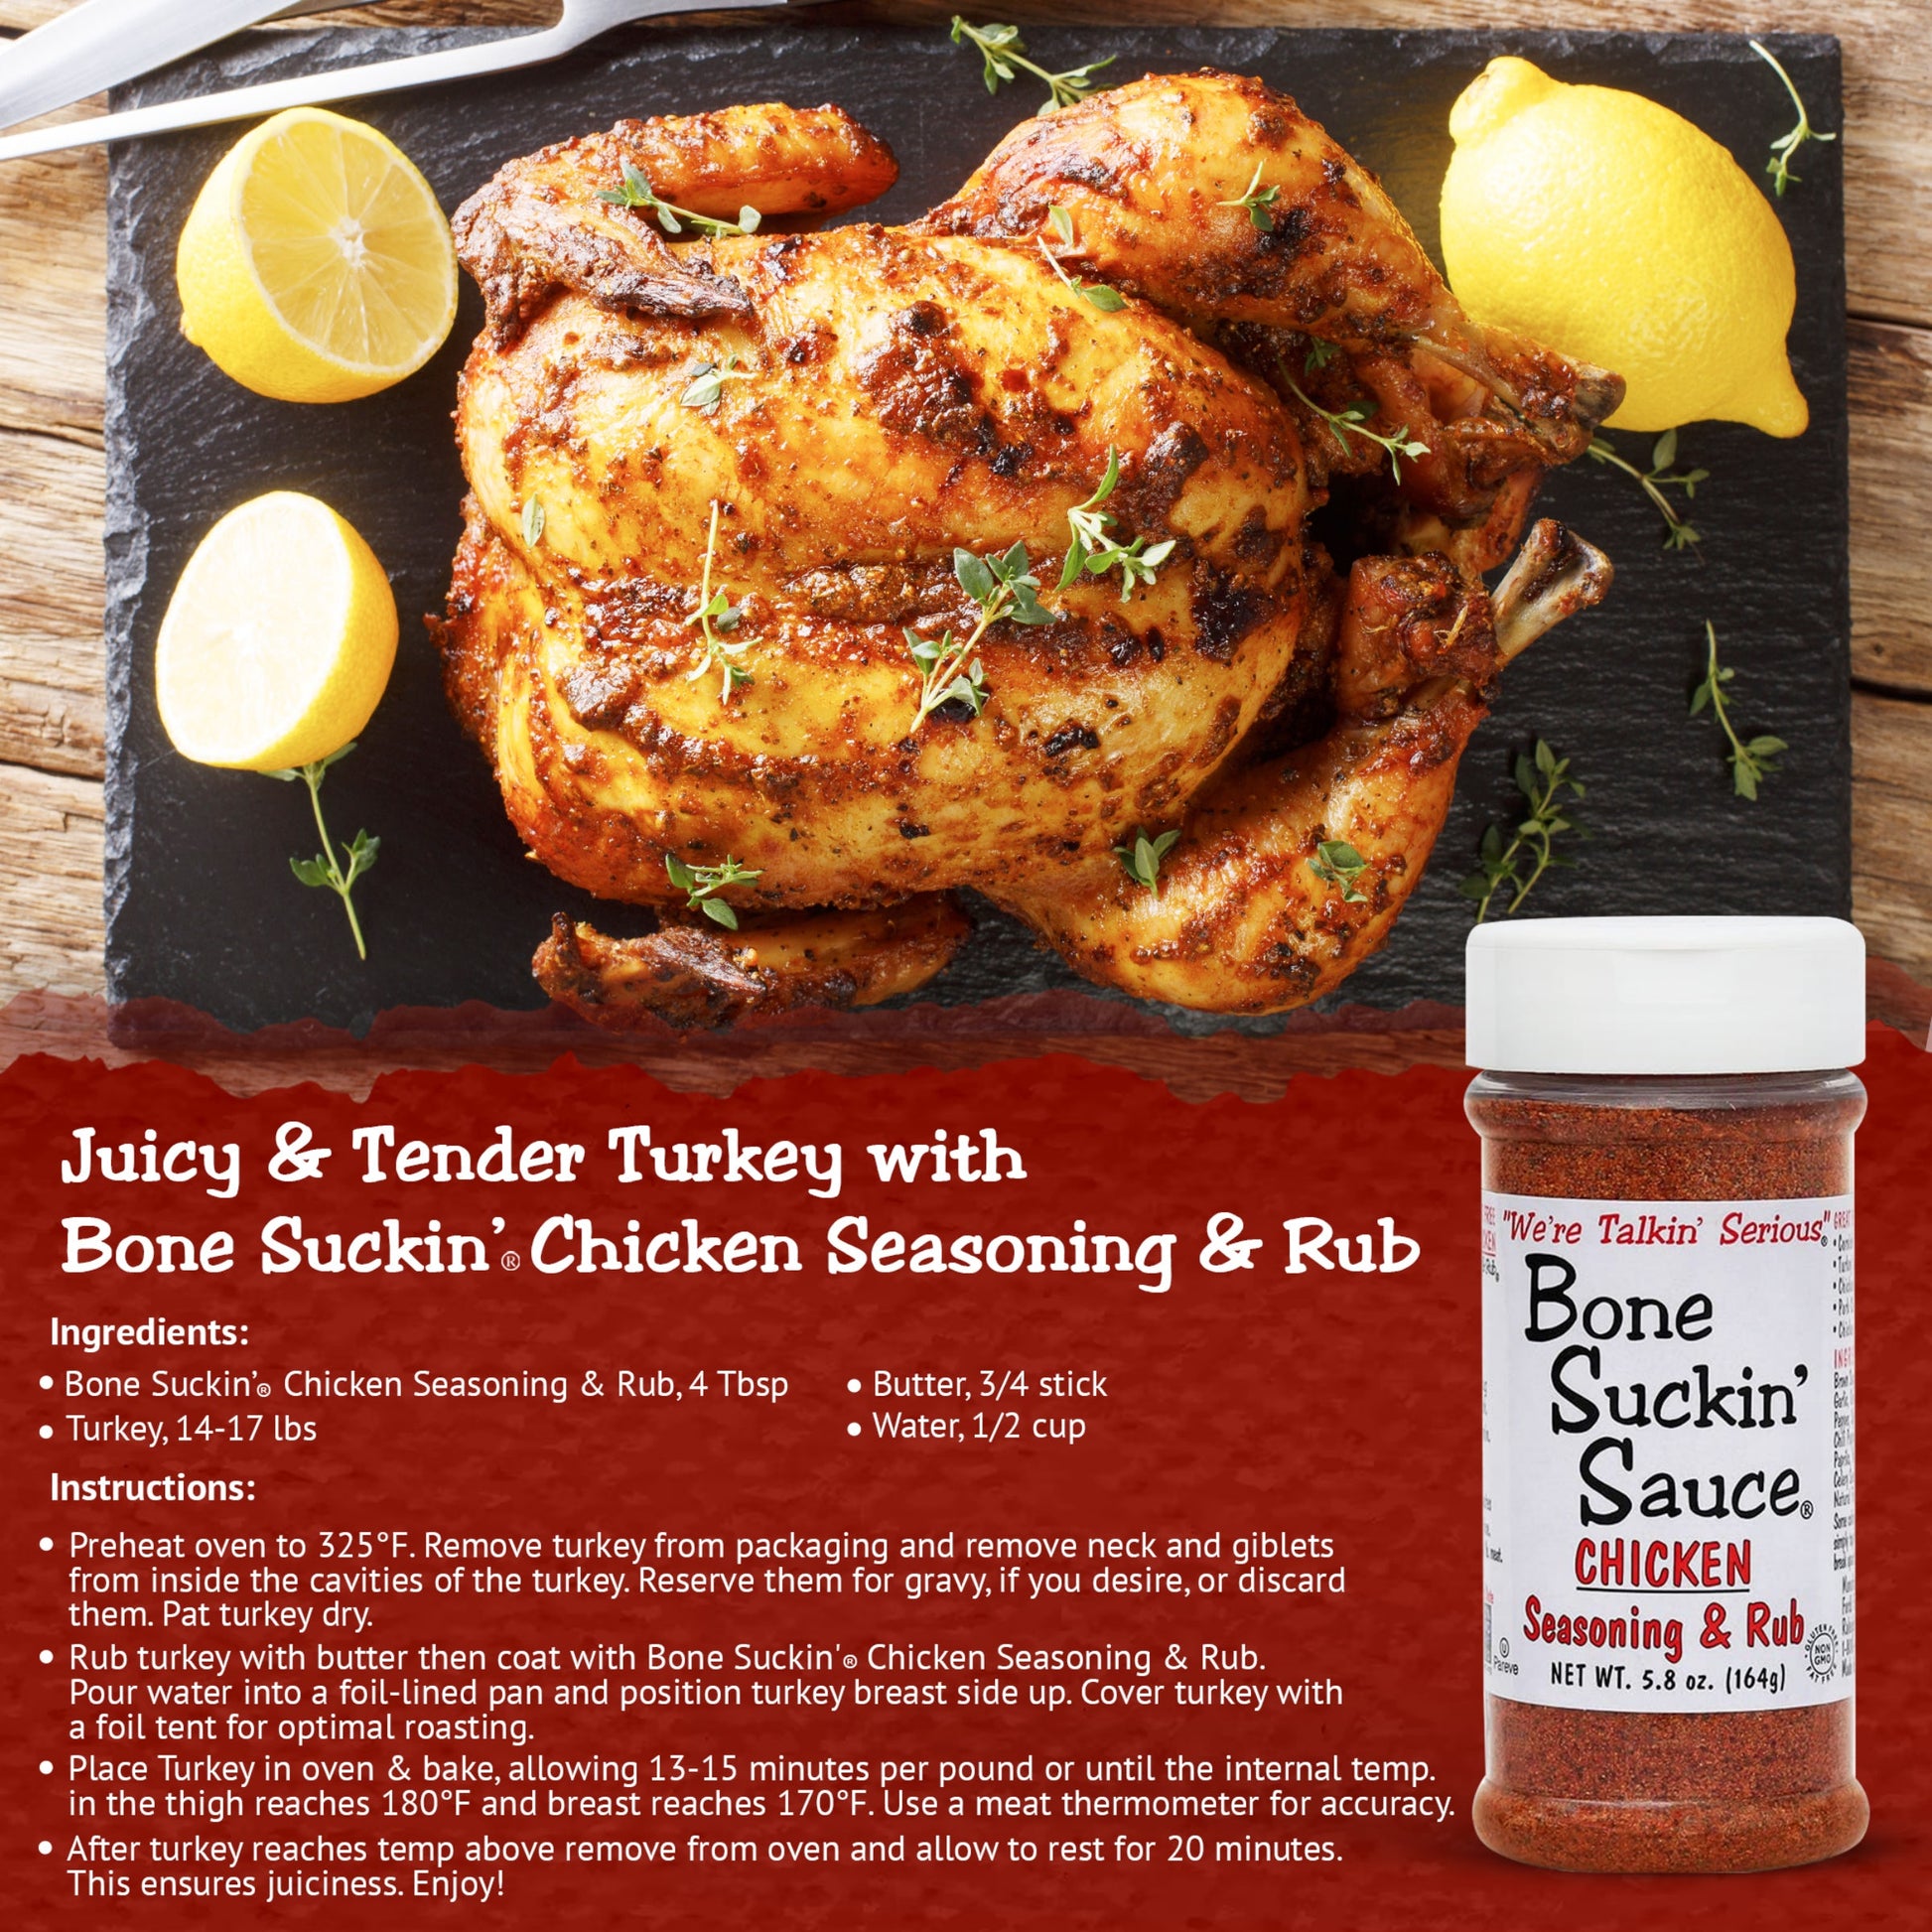 Juicy & Tender Turkey with Bone Suckin' Chicken Seasoning & Rub Recipe. Ingredients: Bone suckin' Chicken Seasoning & Rub, 4 tbsp. 3/4 stick butter. 1/2 cup water. 14-17lb turkey. Instructions: Preheat oven to 325. Remove turkey neck and giblets. Pat turkey dry. Rub turkey with butter and c oat with Bone Suckin' Chicken Seasoning & Rub. Pour water into foil-lined pan. Position turkey breast side up and cover with a foil tent. Bake for 13-15 minutes per pound or until internal thigh temp reaches 180.